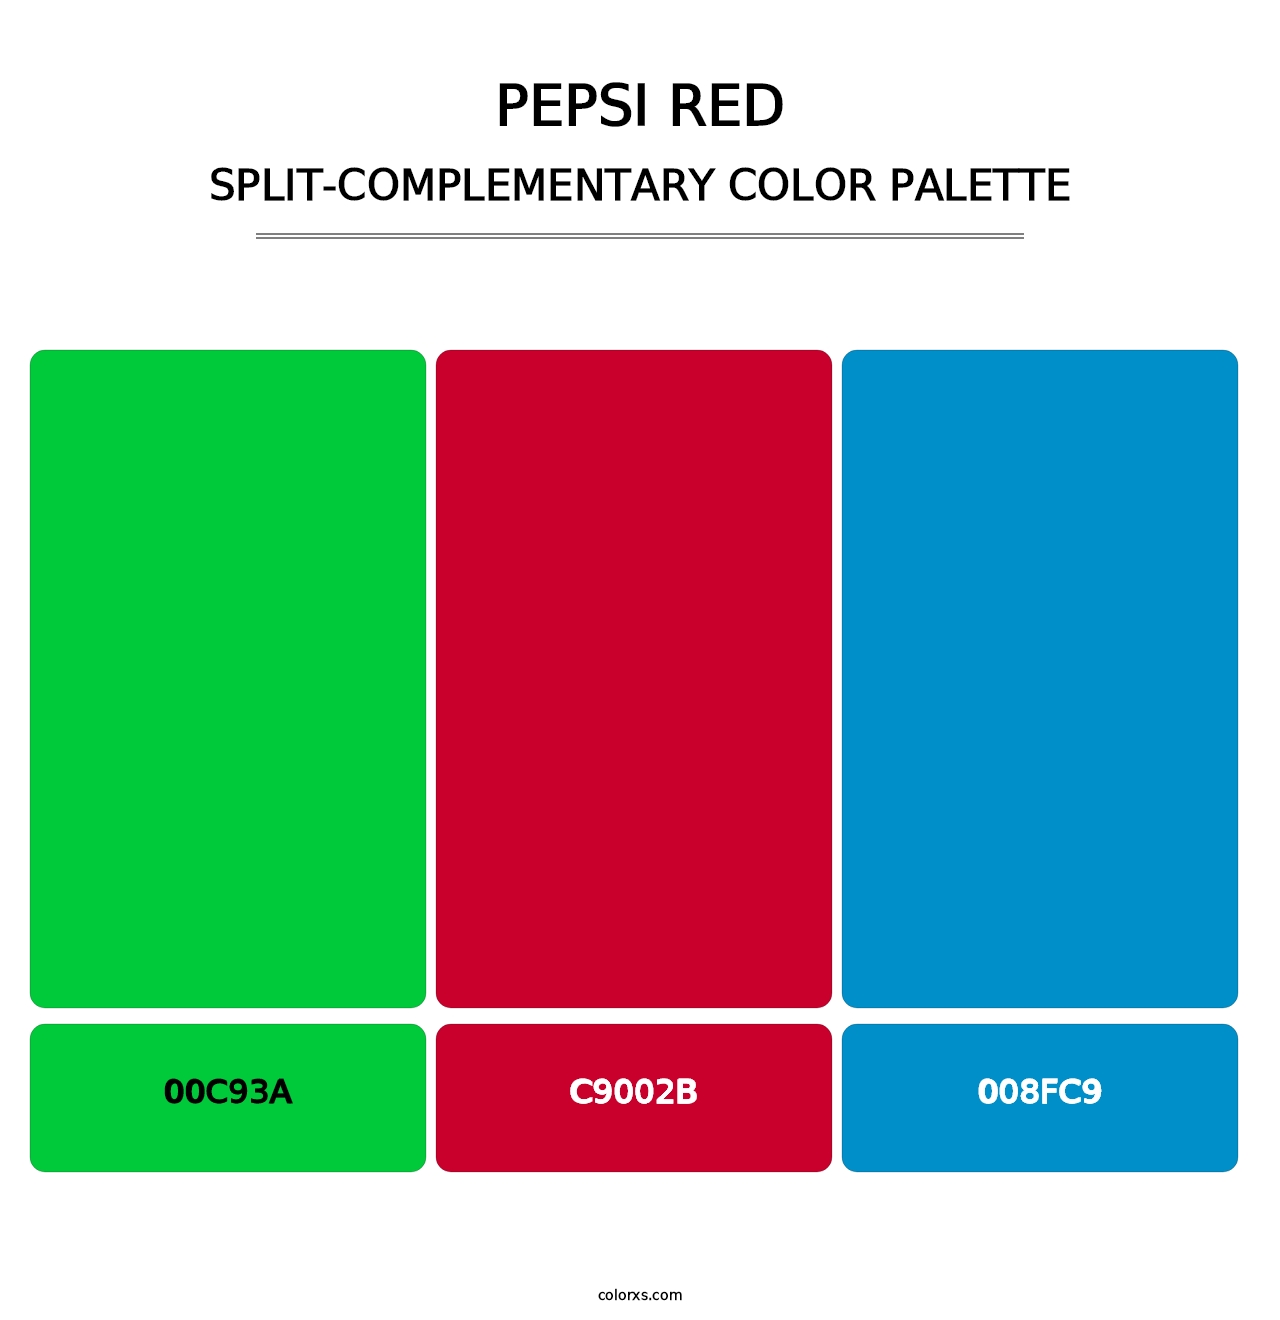 Pepsi Red - Split-Complementary Color Palette